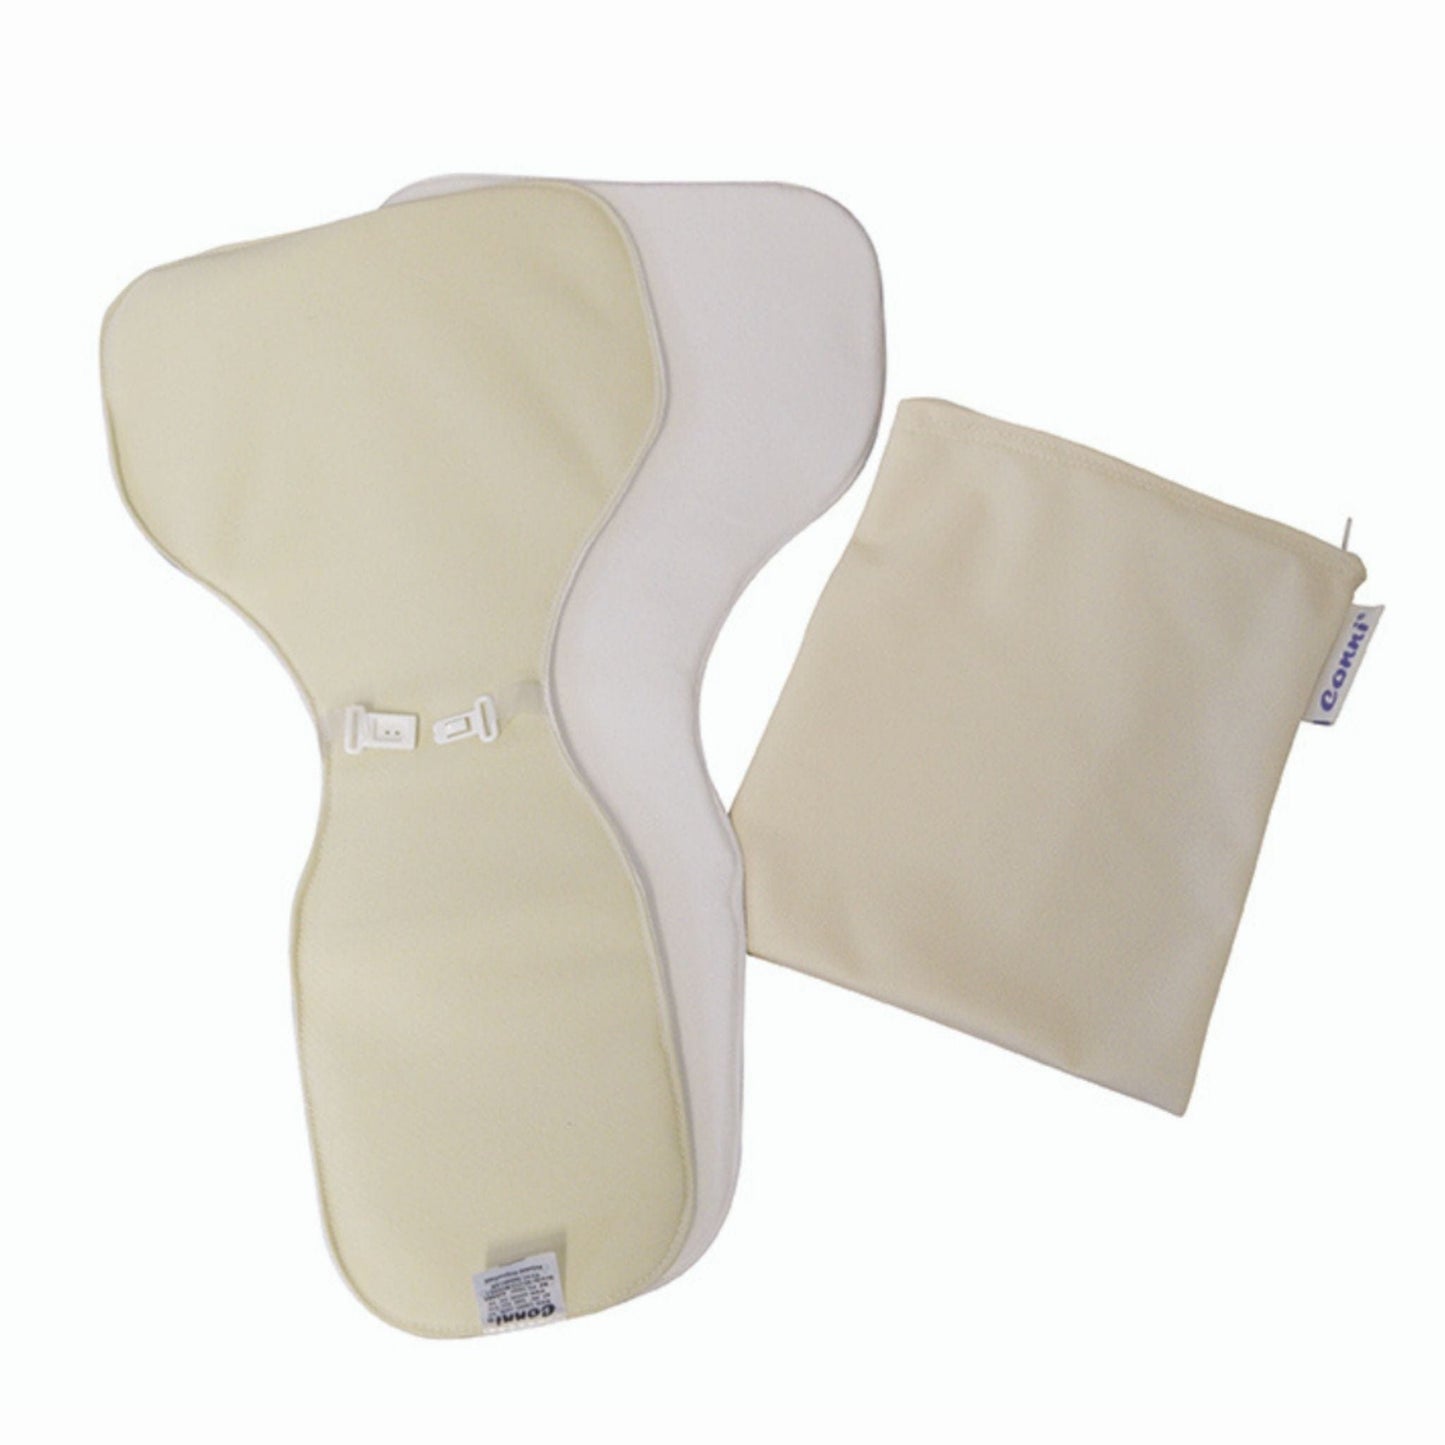 Men's Incontinence Pads - Caring Clothing